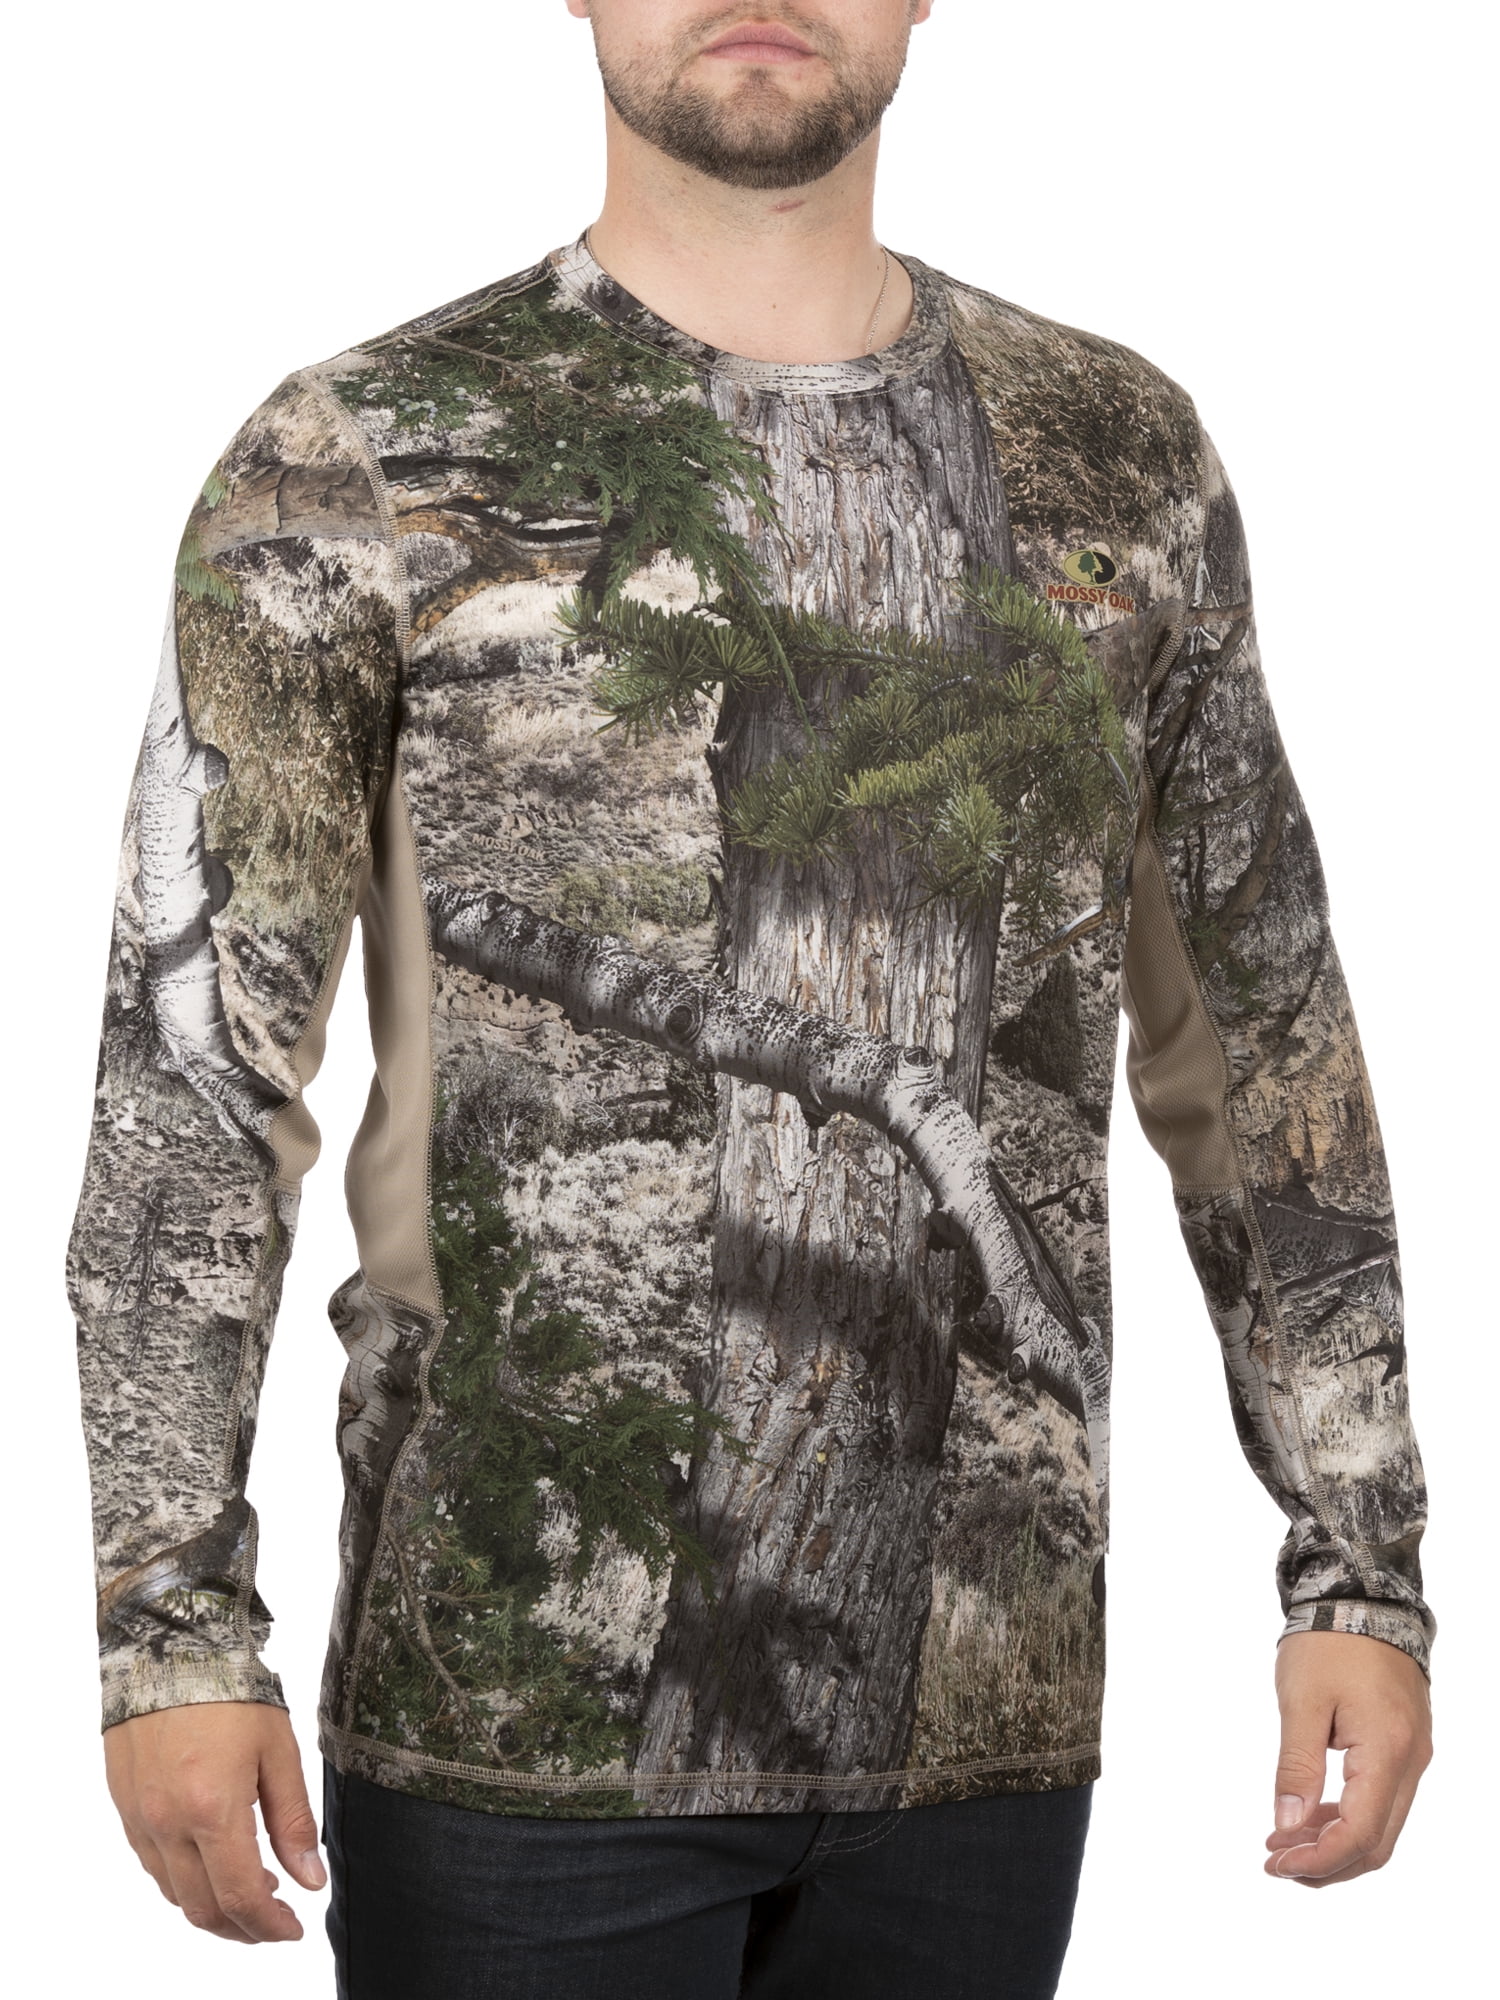 Aftco Country DNA Mossy Oak L/S Performance Shirt